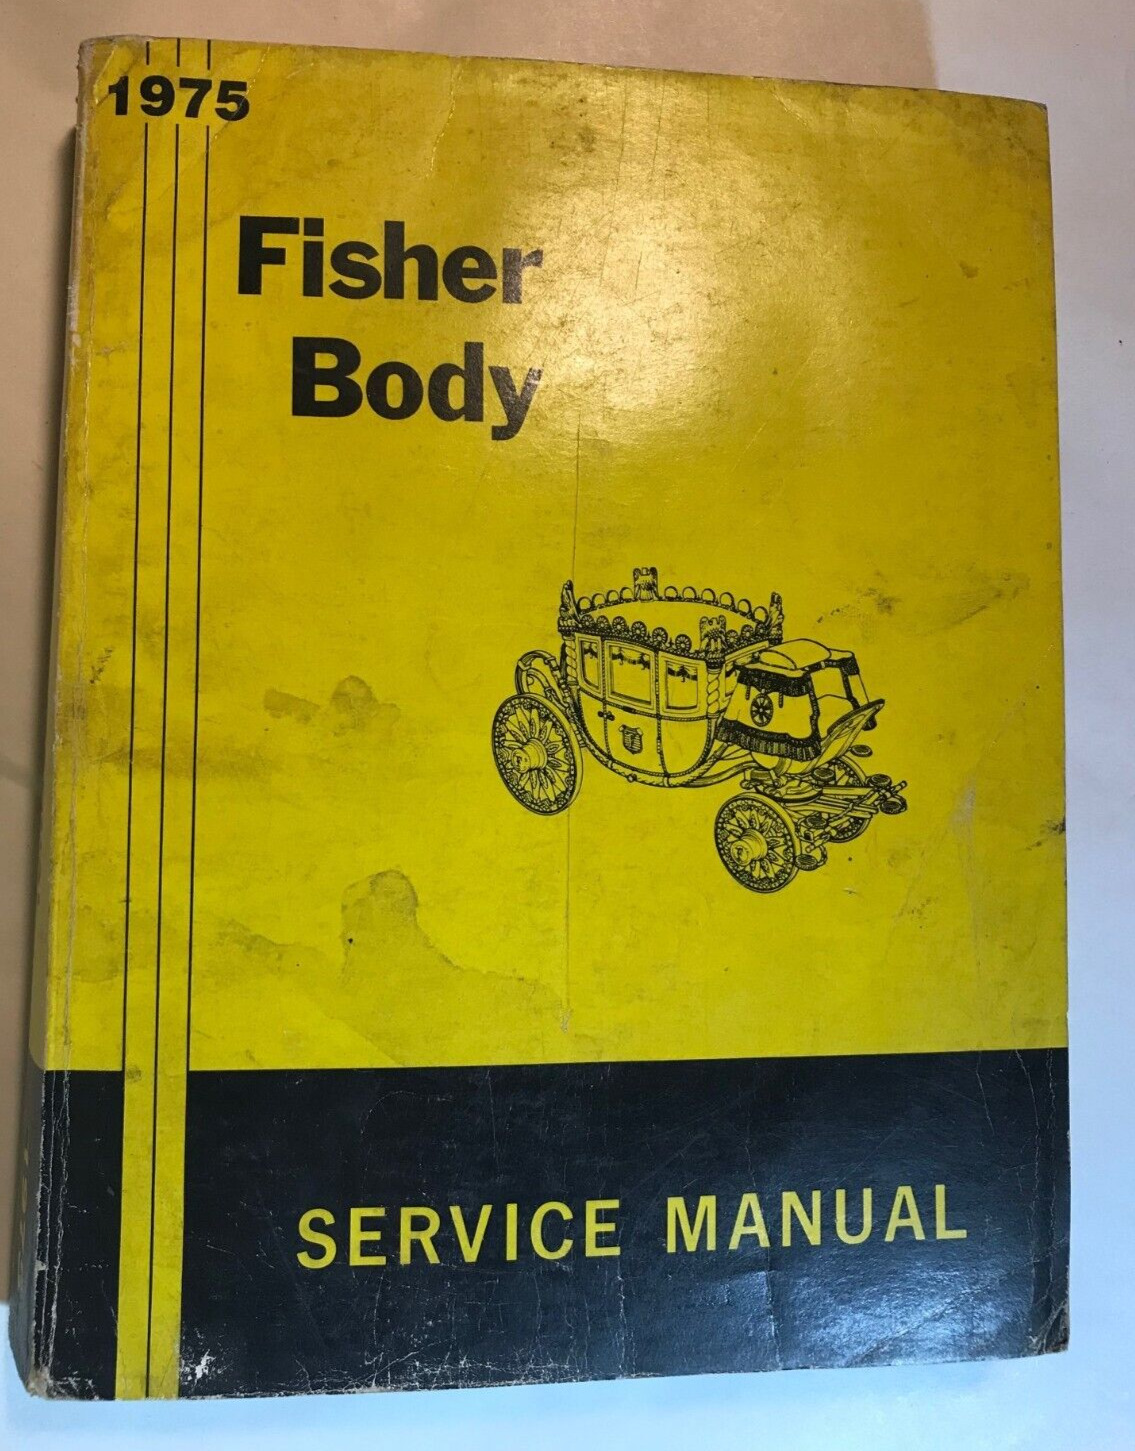 1974-75 FISHER BODY SERVICE MANUAL ABOUT 300+ PAGES CAR BOOK ALL BODY TYPES